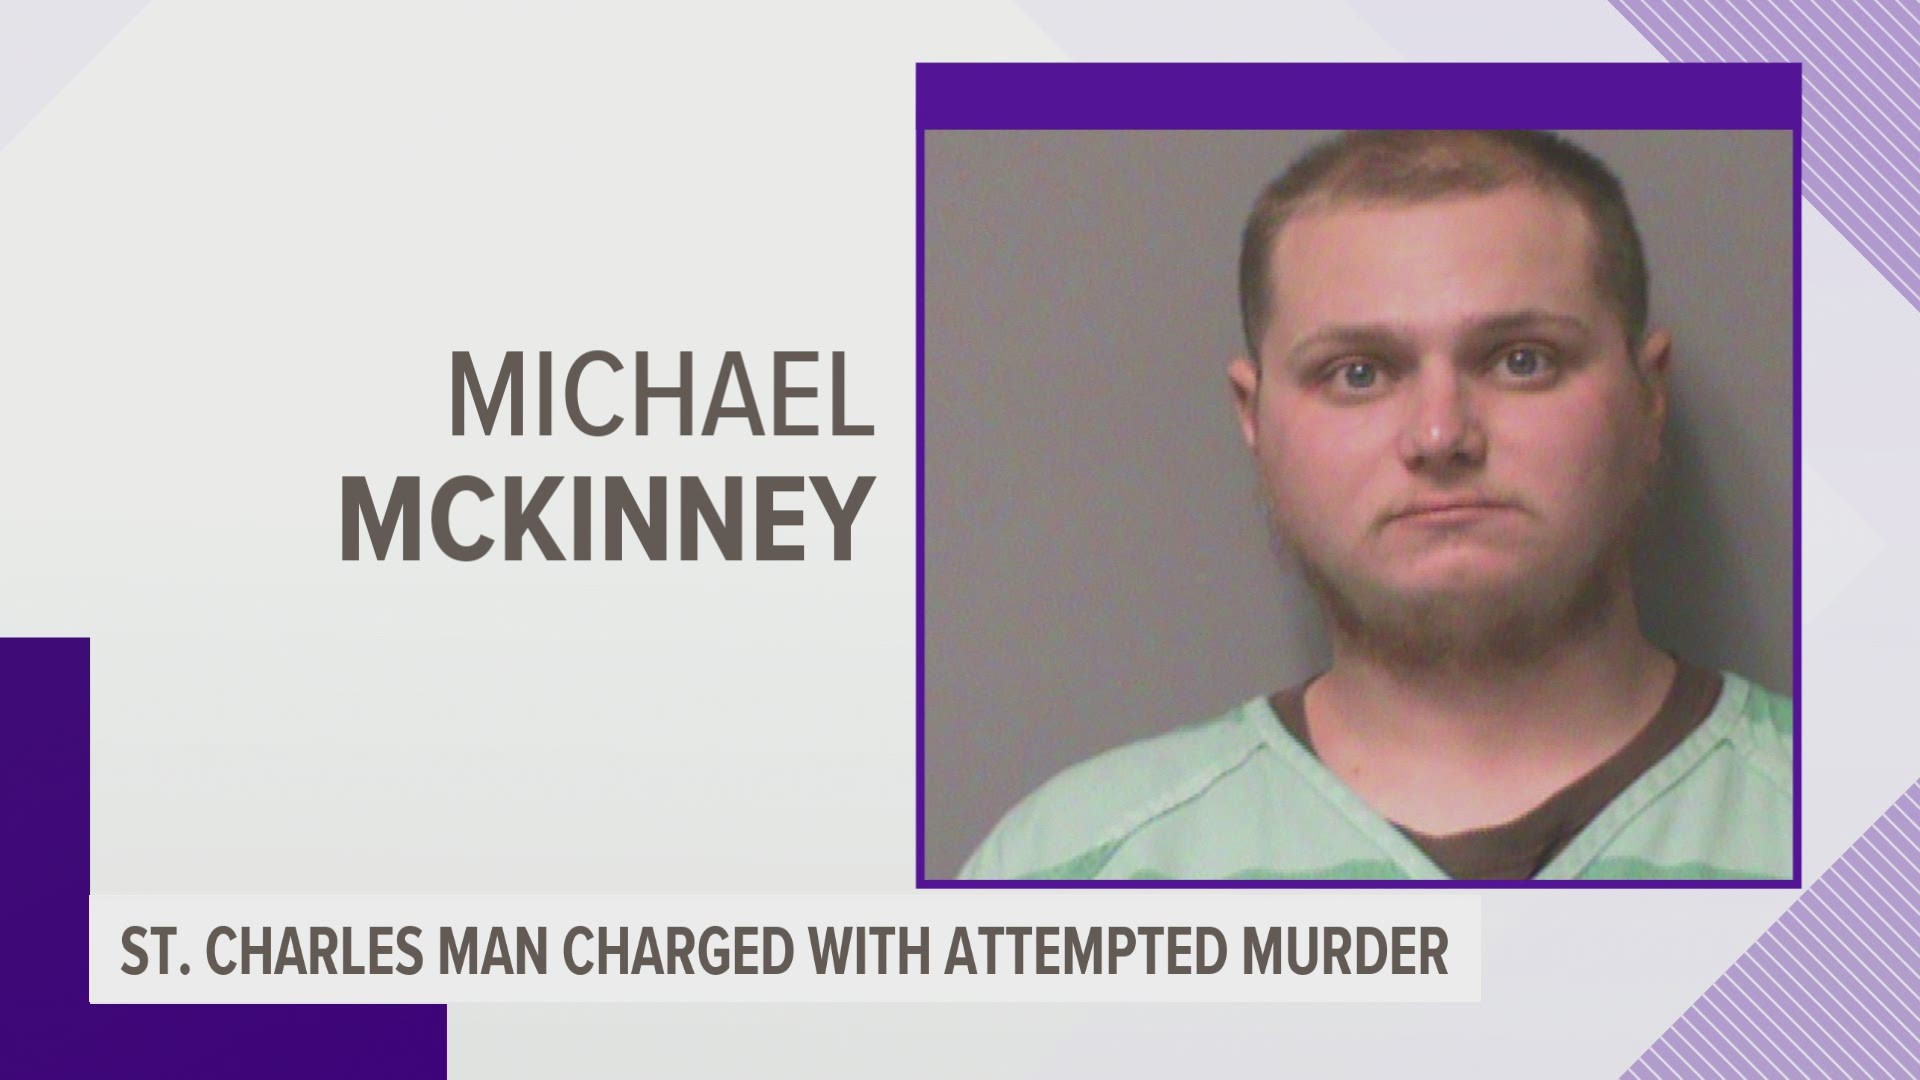 Michael McKinney, who was heavily armed and wearing body armor, told police he fired in self-defense during a tense confrontation at a Trump rally last month.